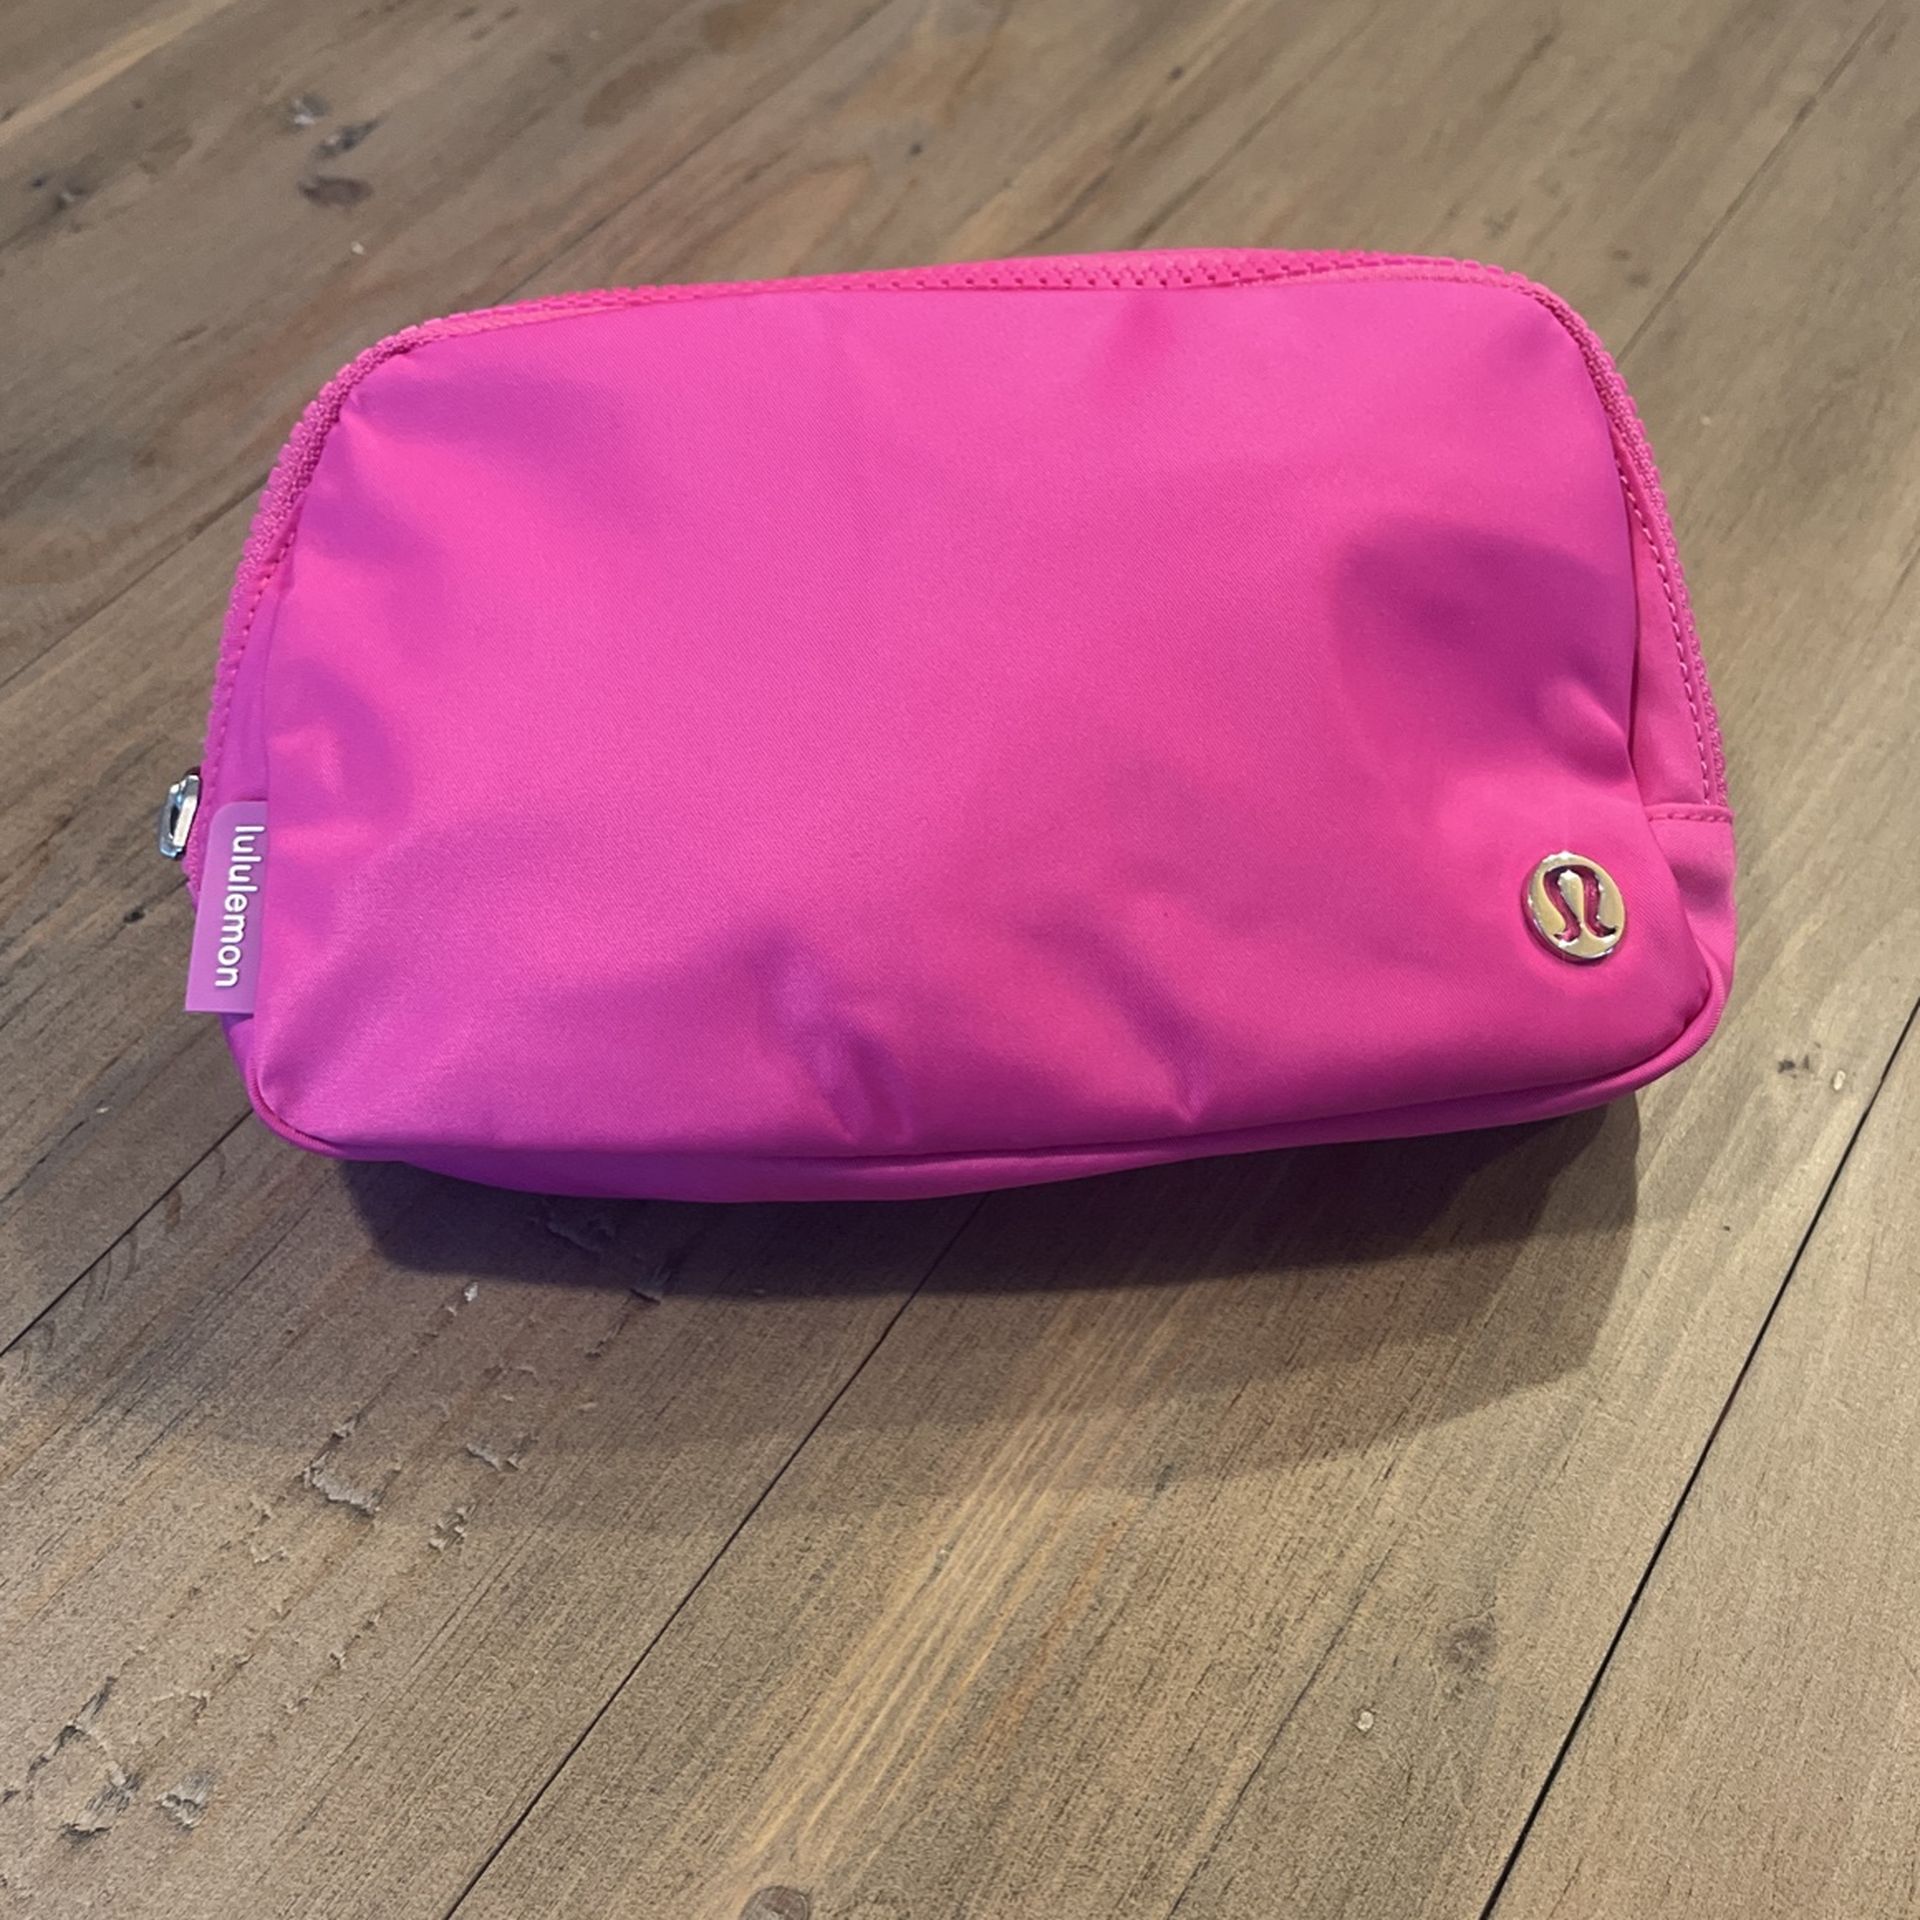 Lululemon - Everywhere Belt Bag - NWT - SONIC PINK Sold Out Online